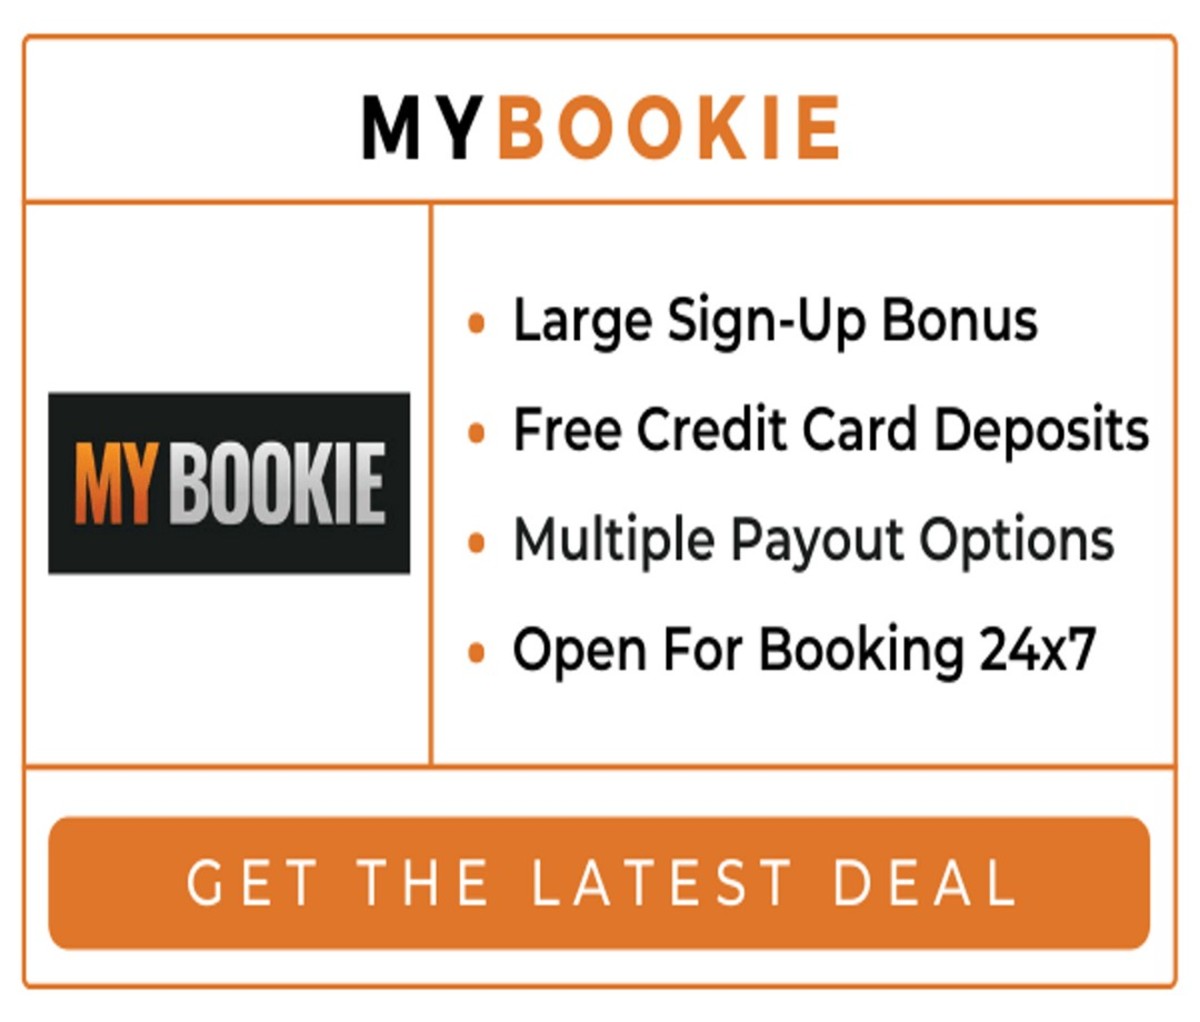 MyBookie - Best For Online Sports Odds And Lines